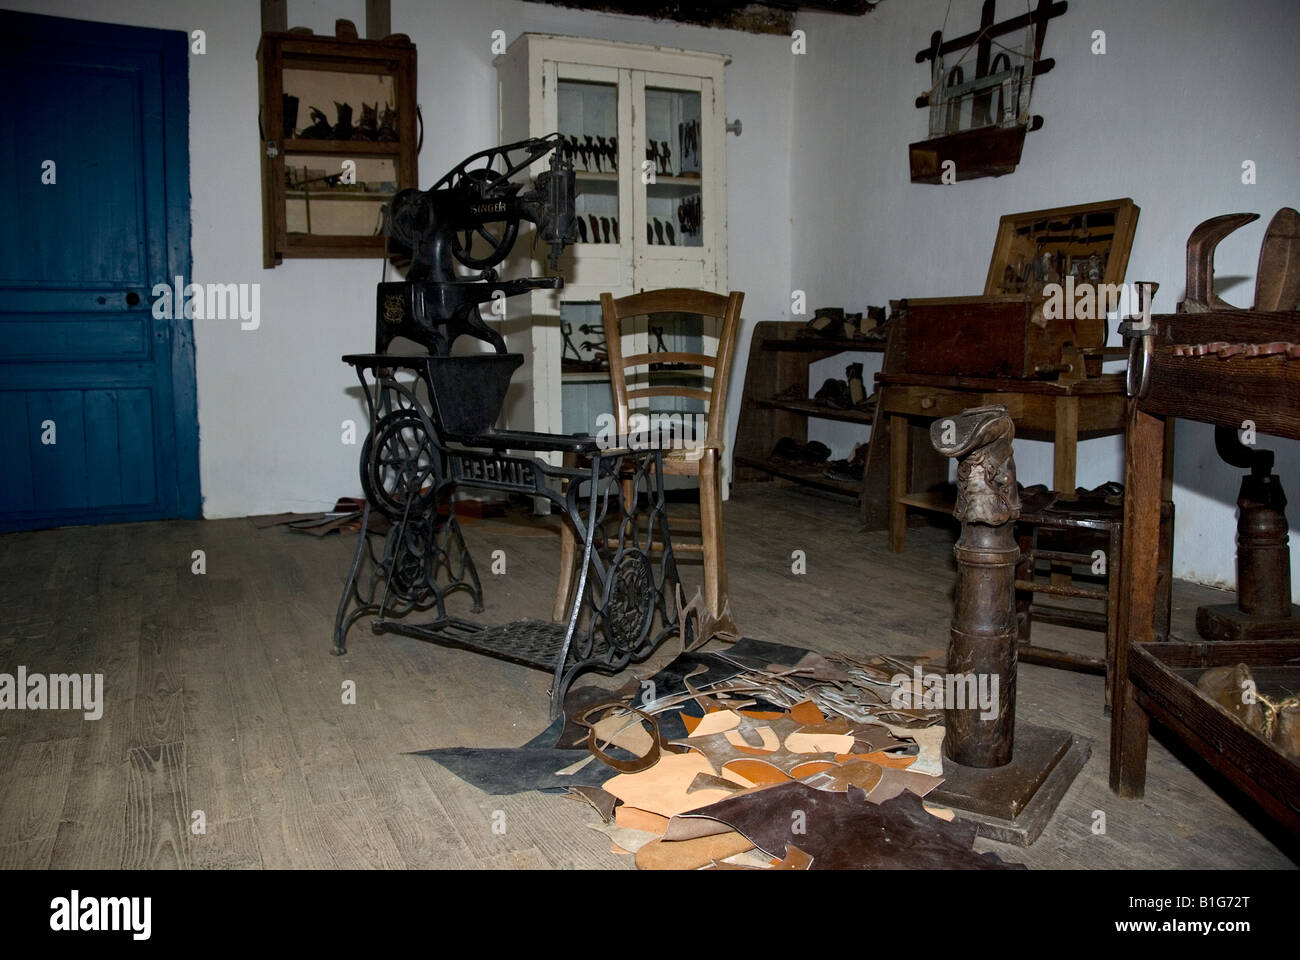 Stock photo of the inside of the renovated shoemakers shop in the village of Montrol Senard Stock Photo